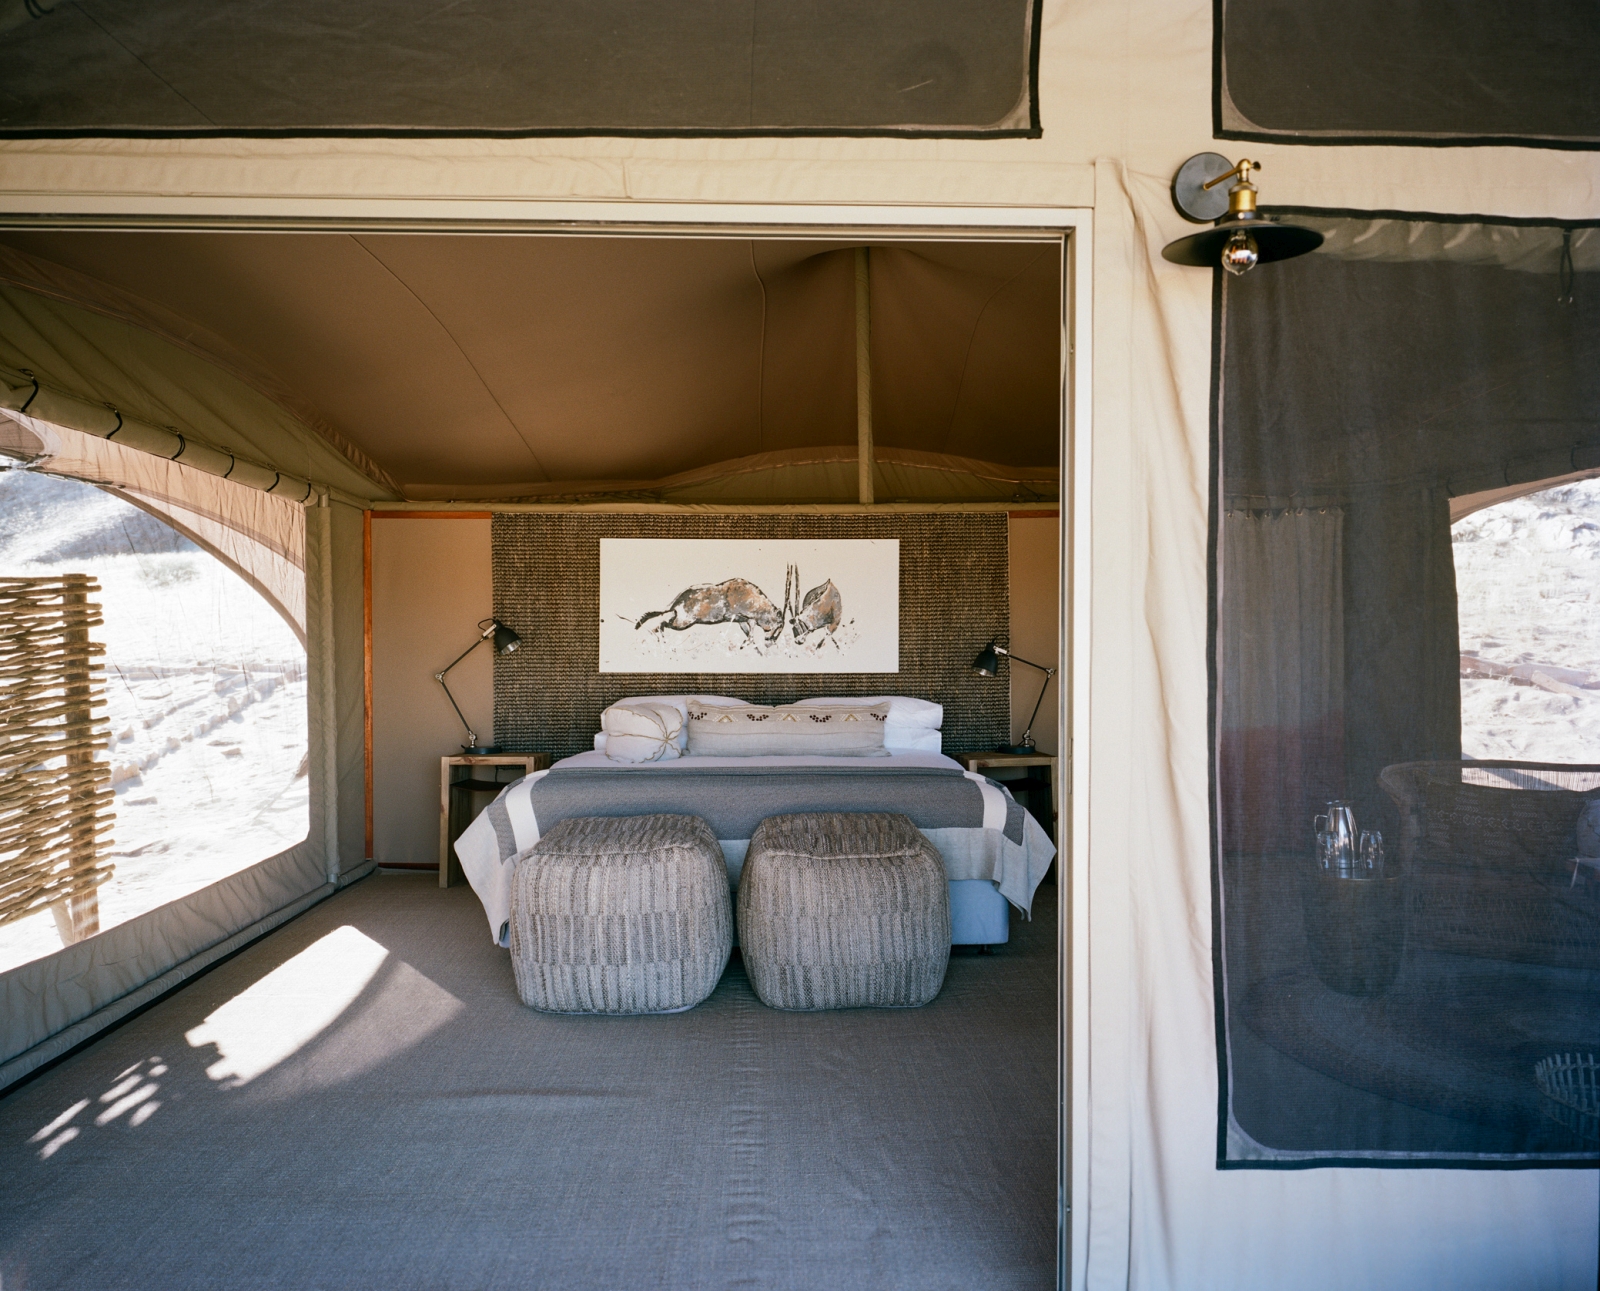 Tented bedroom with animal drawing over bed